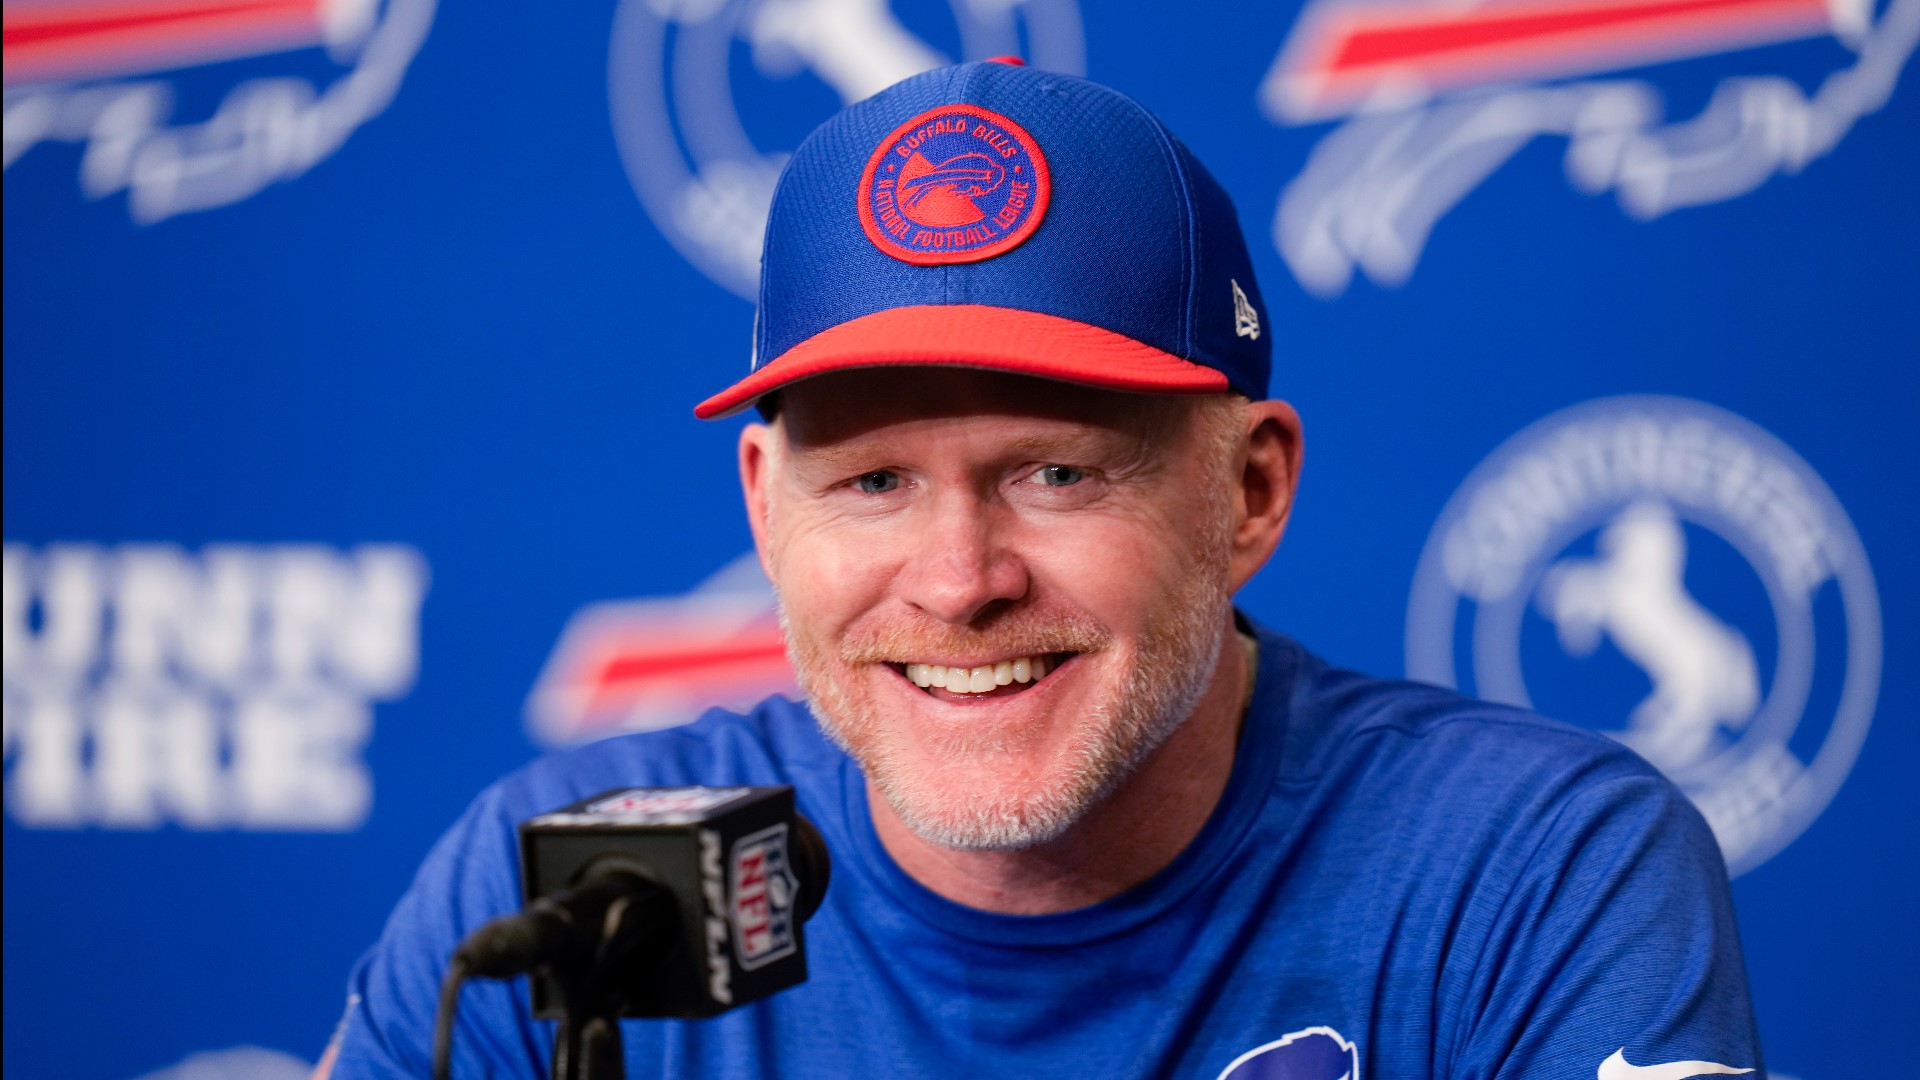 Bills postgame reaction: Sean McDermott discusses the 24-22 Bills victory against the Los Angeles Chargers.